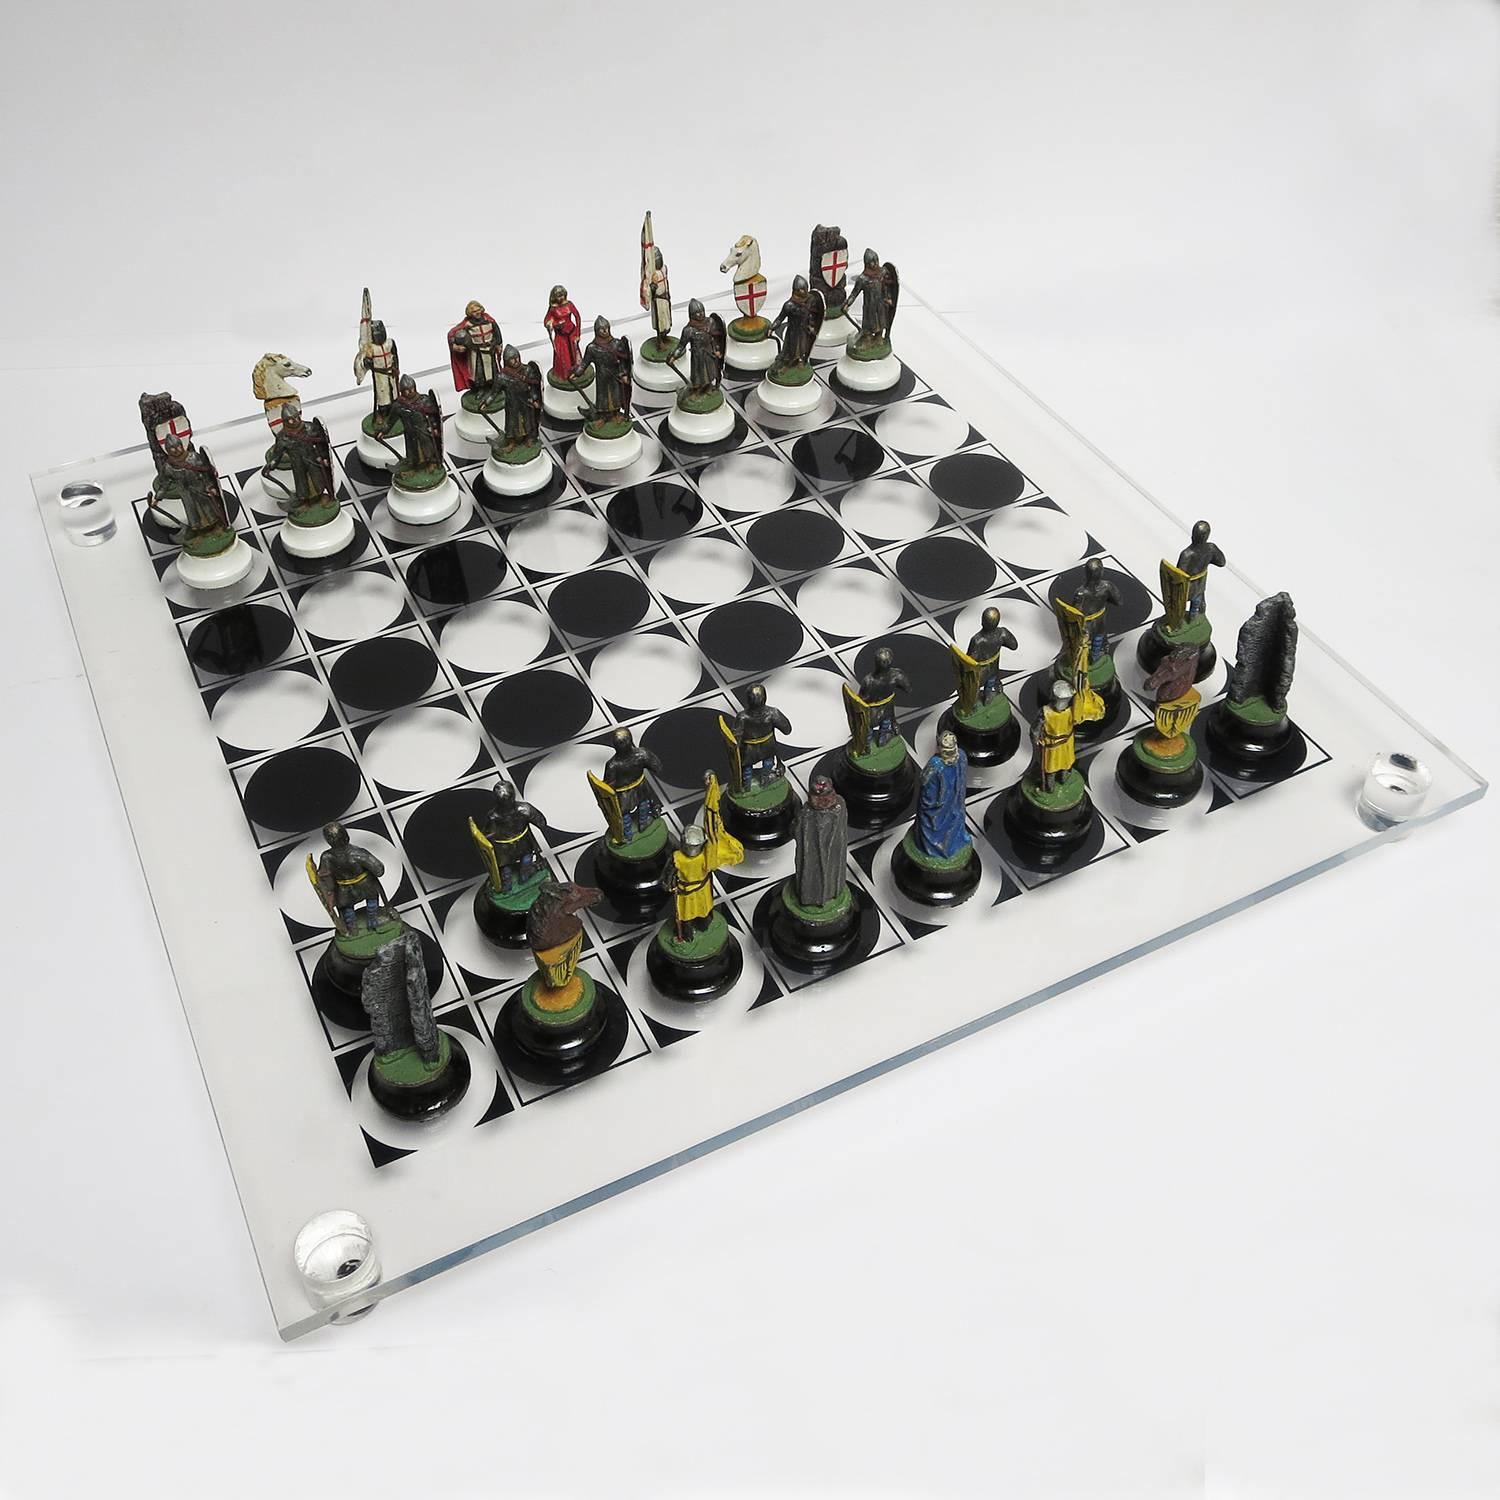 RETIREMENT SALE!!!  EVERYTHING MUST GO - CHECK OUT OUR OTHER ITEMS.				

A great decorative chess set with a see, through Lucite board. All figures are solid lead, and hand-painted. There is various wear to the paint, but the figures are in Fine,